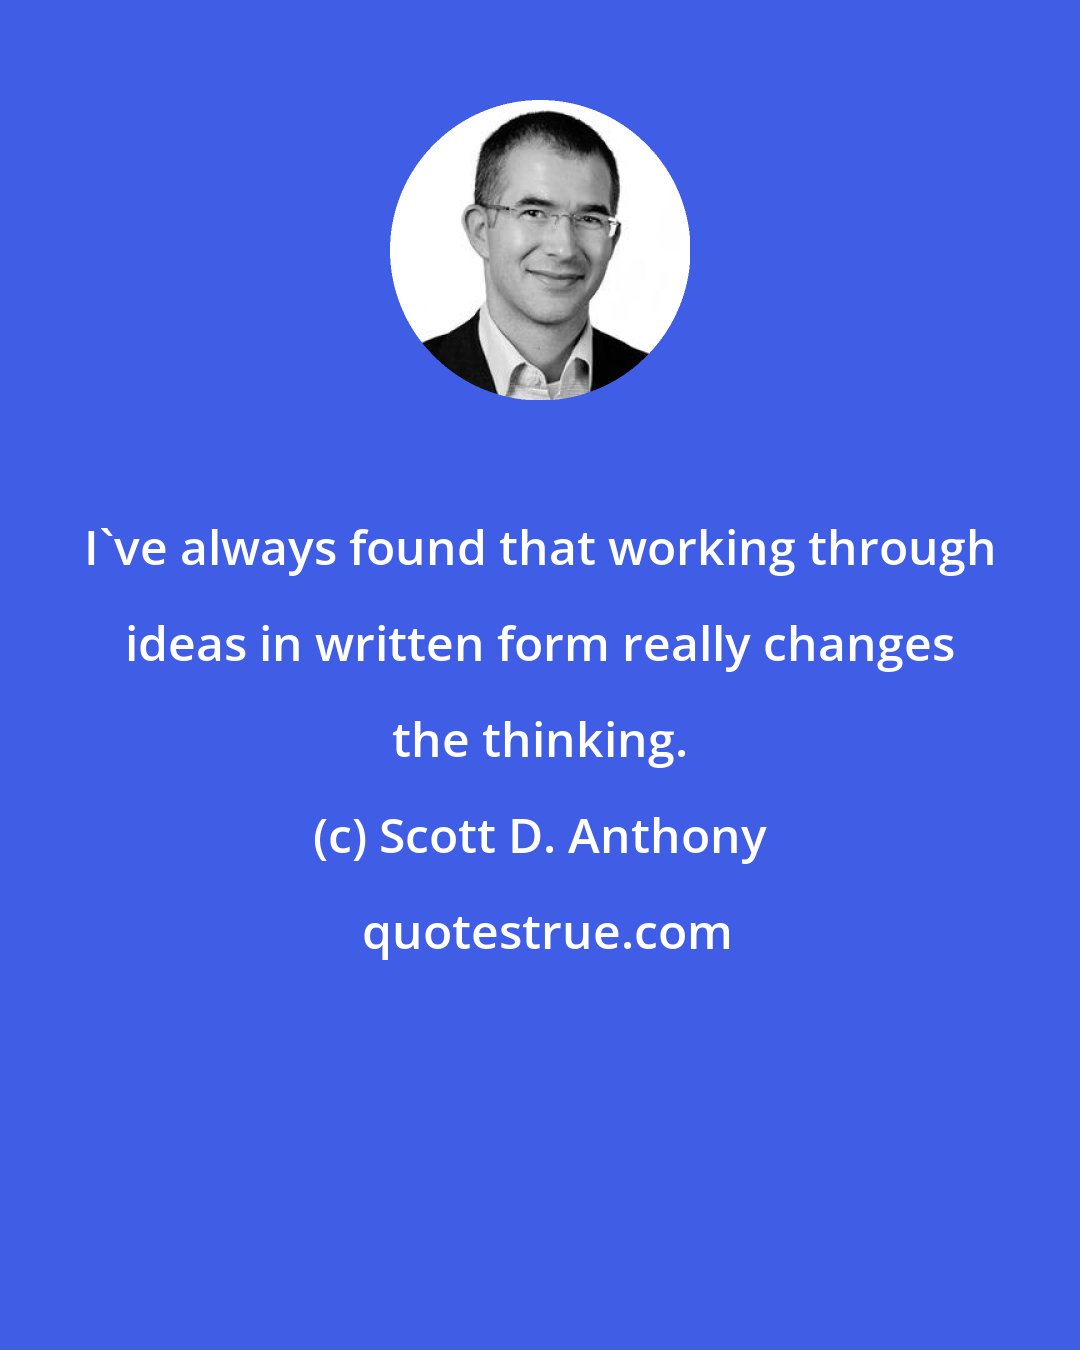 Scott D. Anthony: I've always found that working through ideas in written form really changes the thinking.